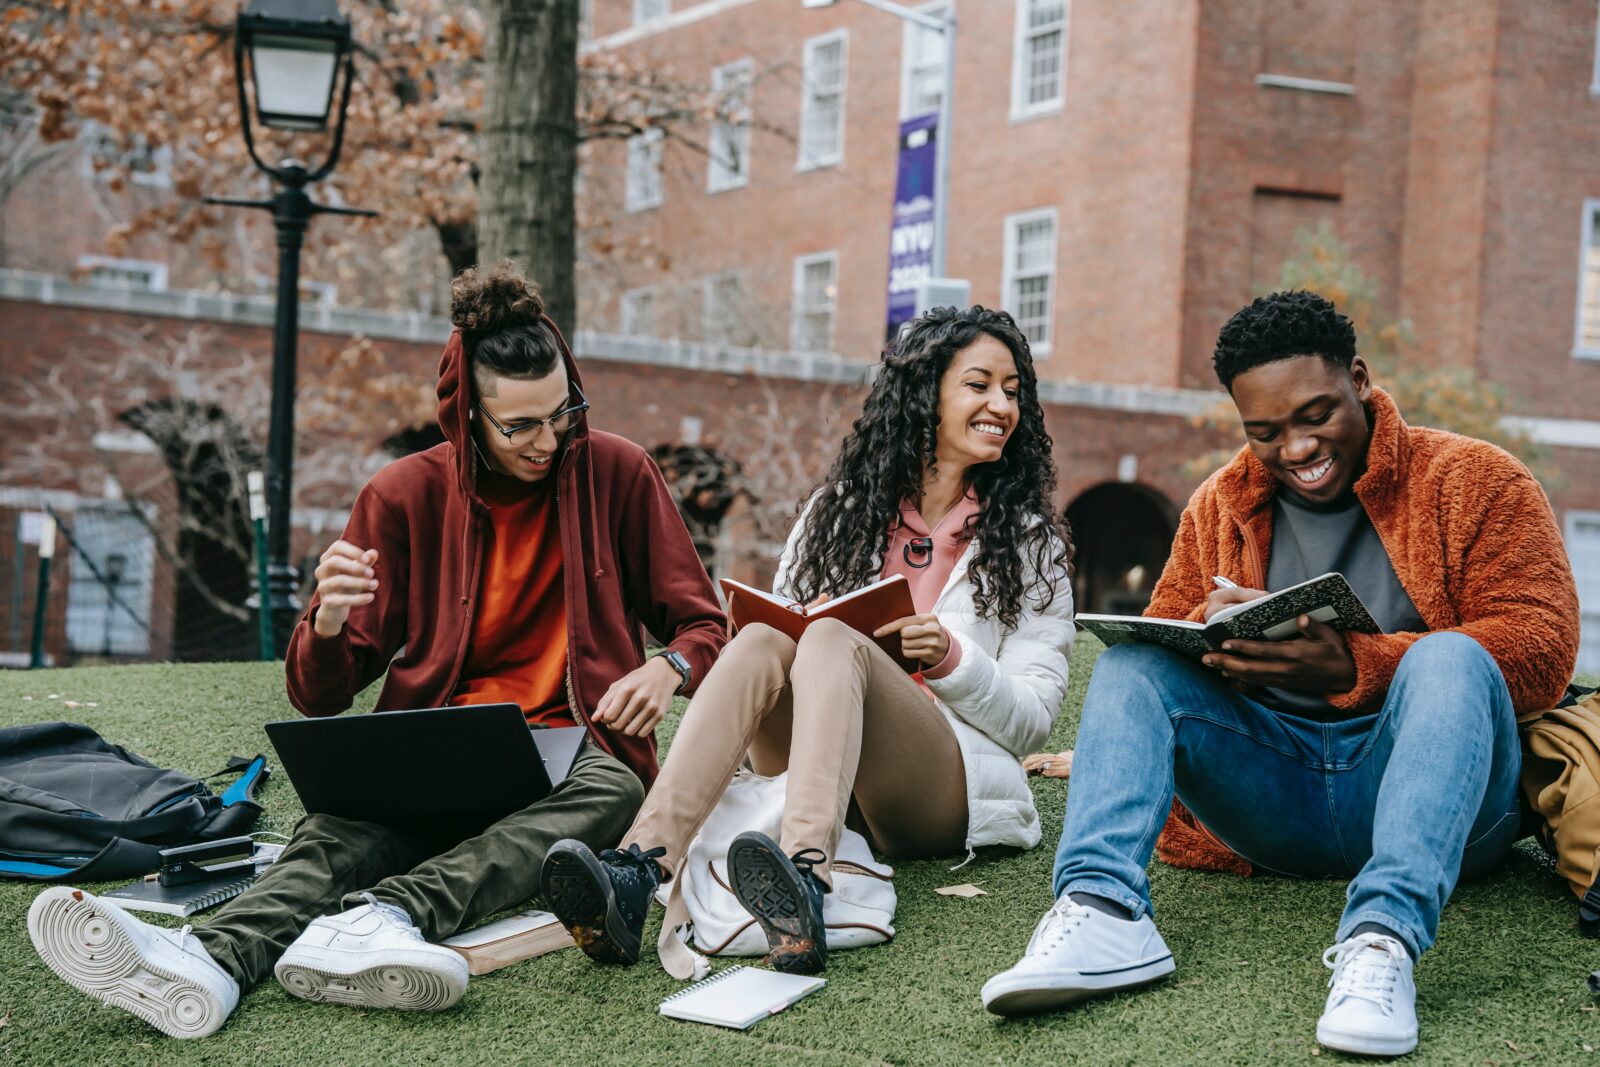 A group of three young people siting on the grass smiling laughing and studying.